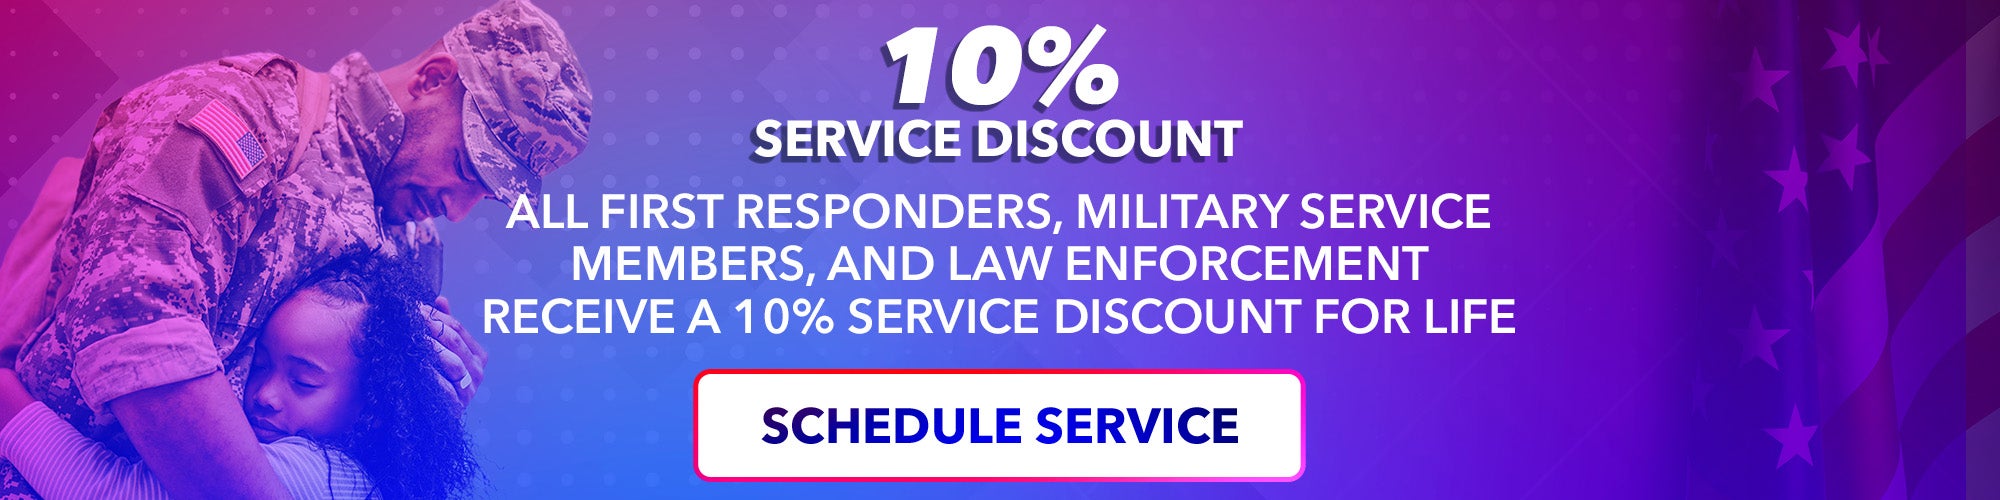 10% service discount for first responders, military, and law